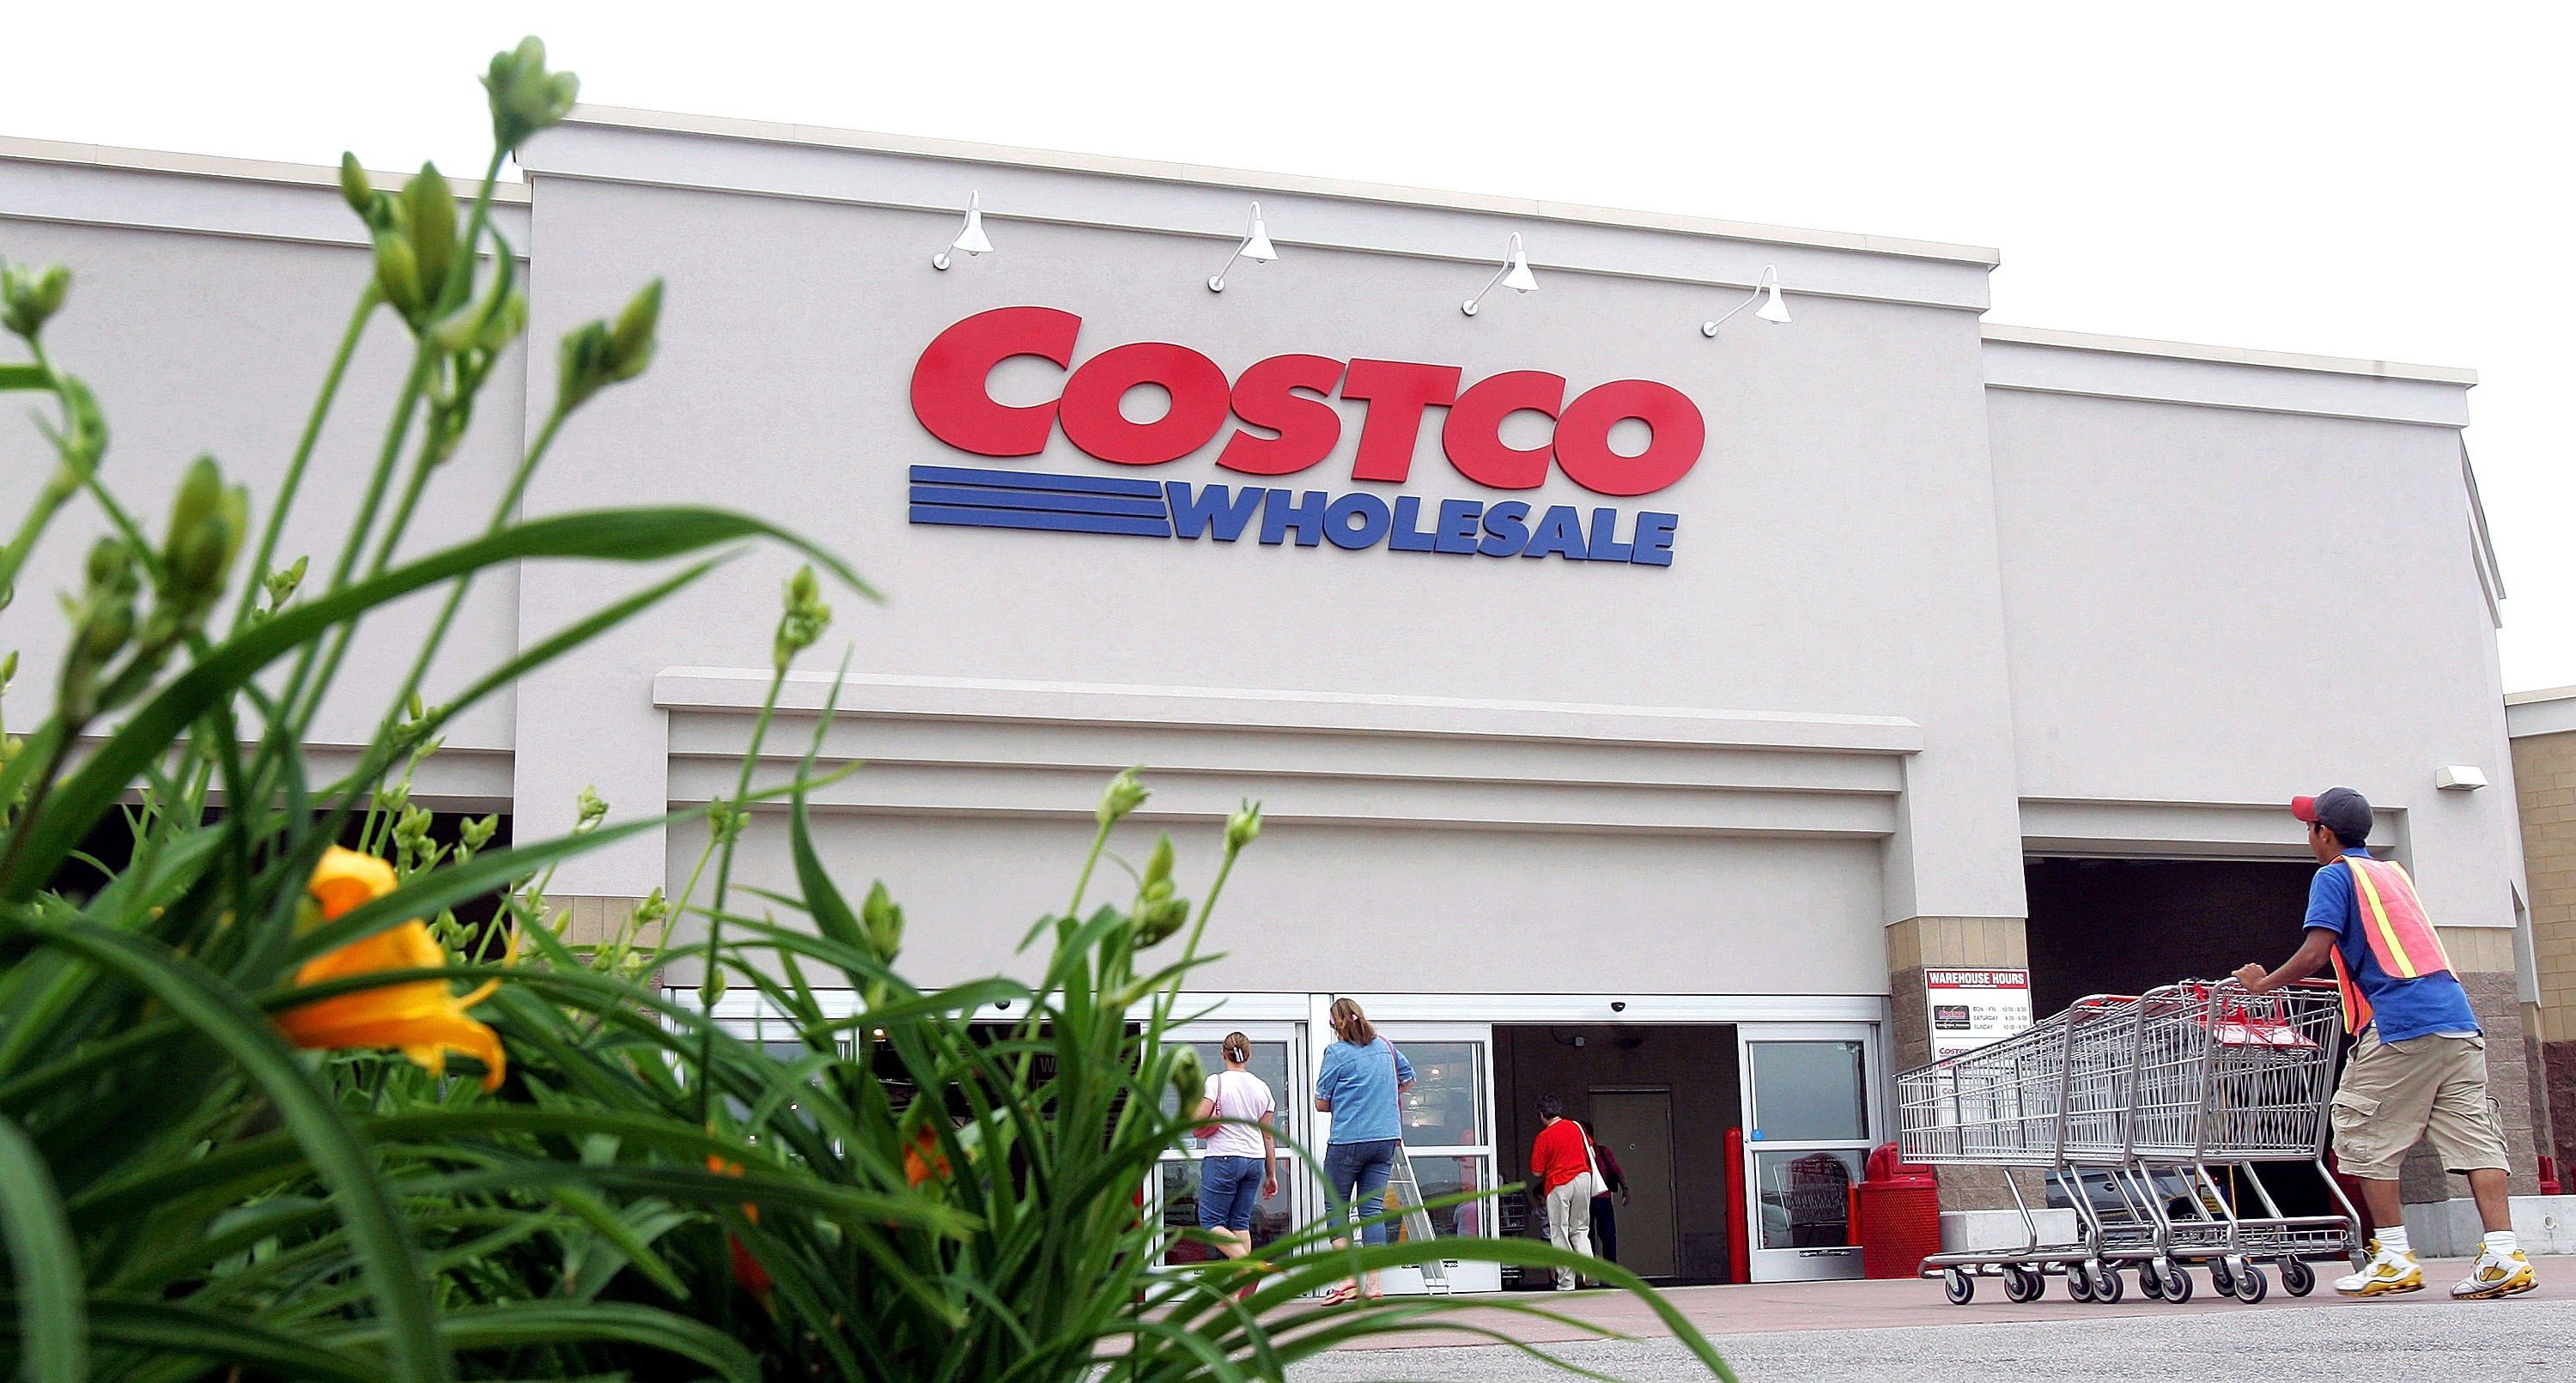 Things You Should Know Before Buying Alcohol At Costco - Delish.com